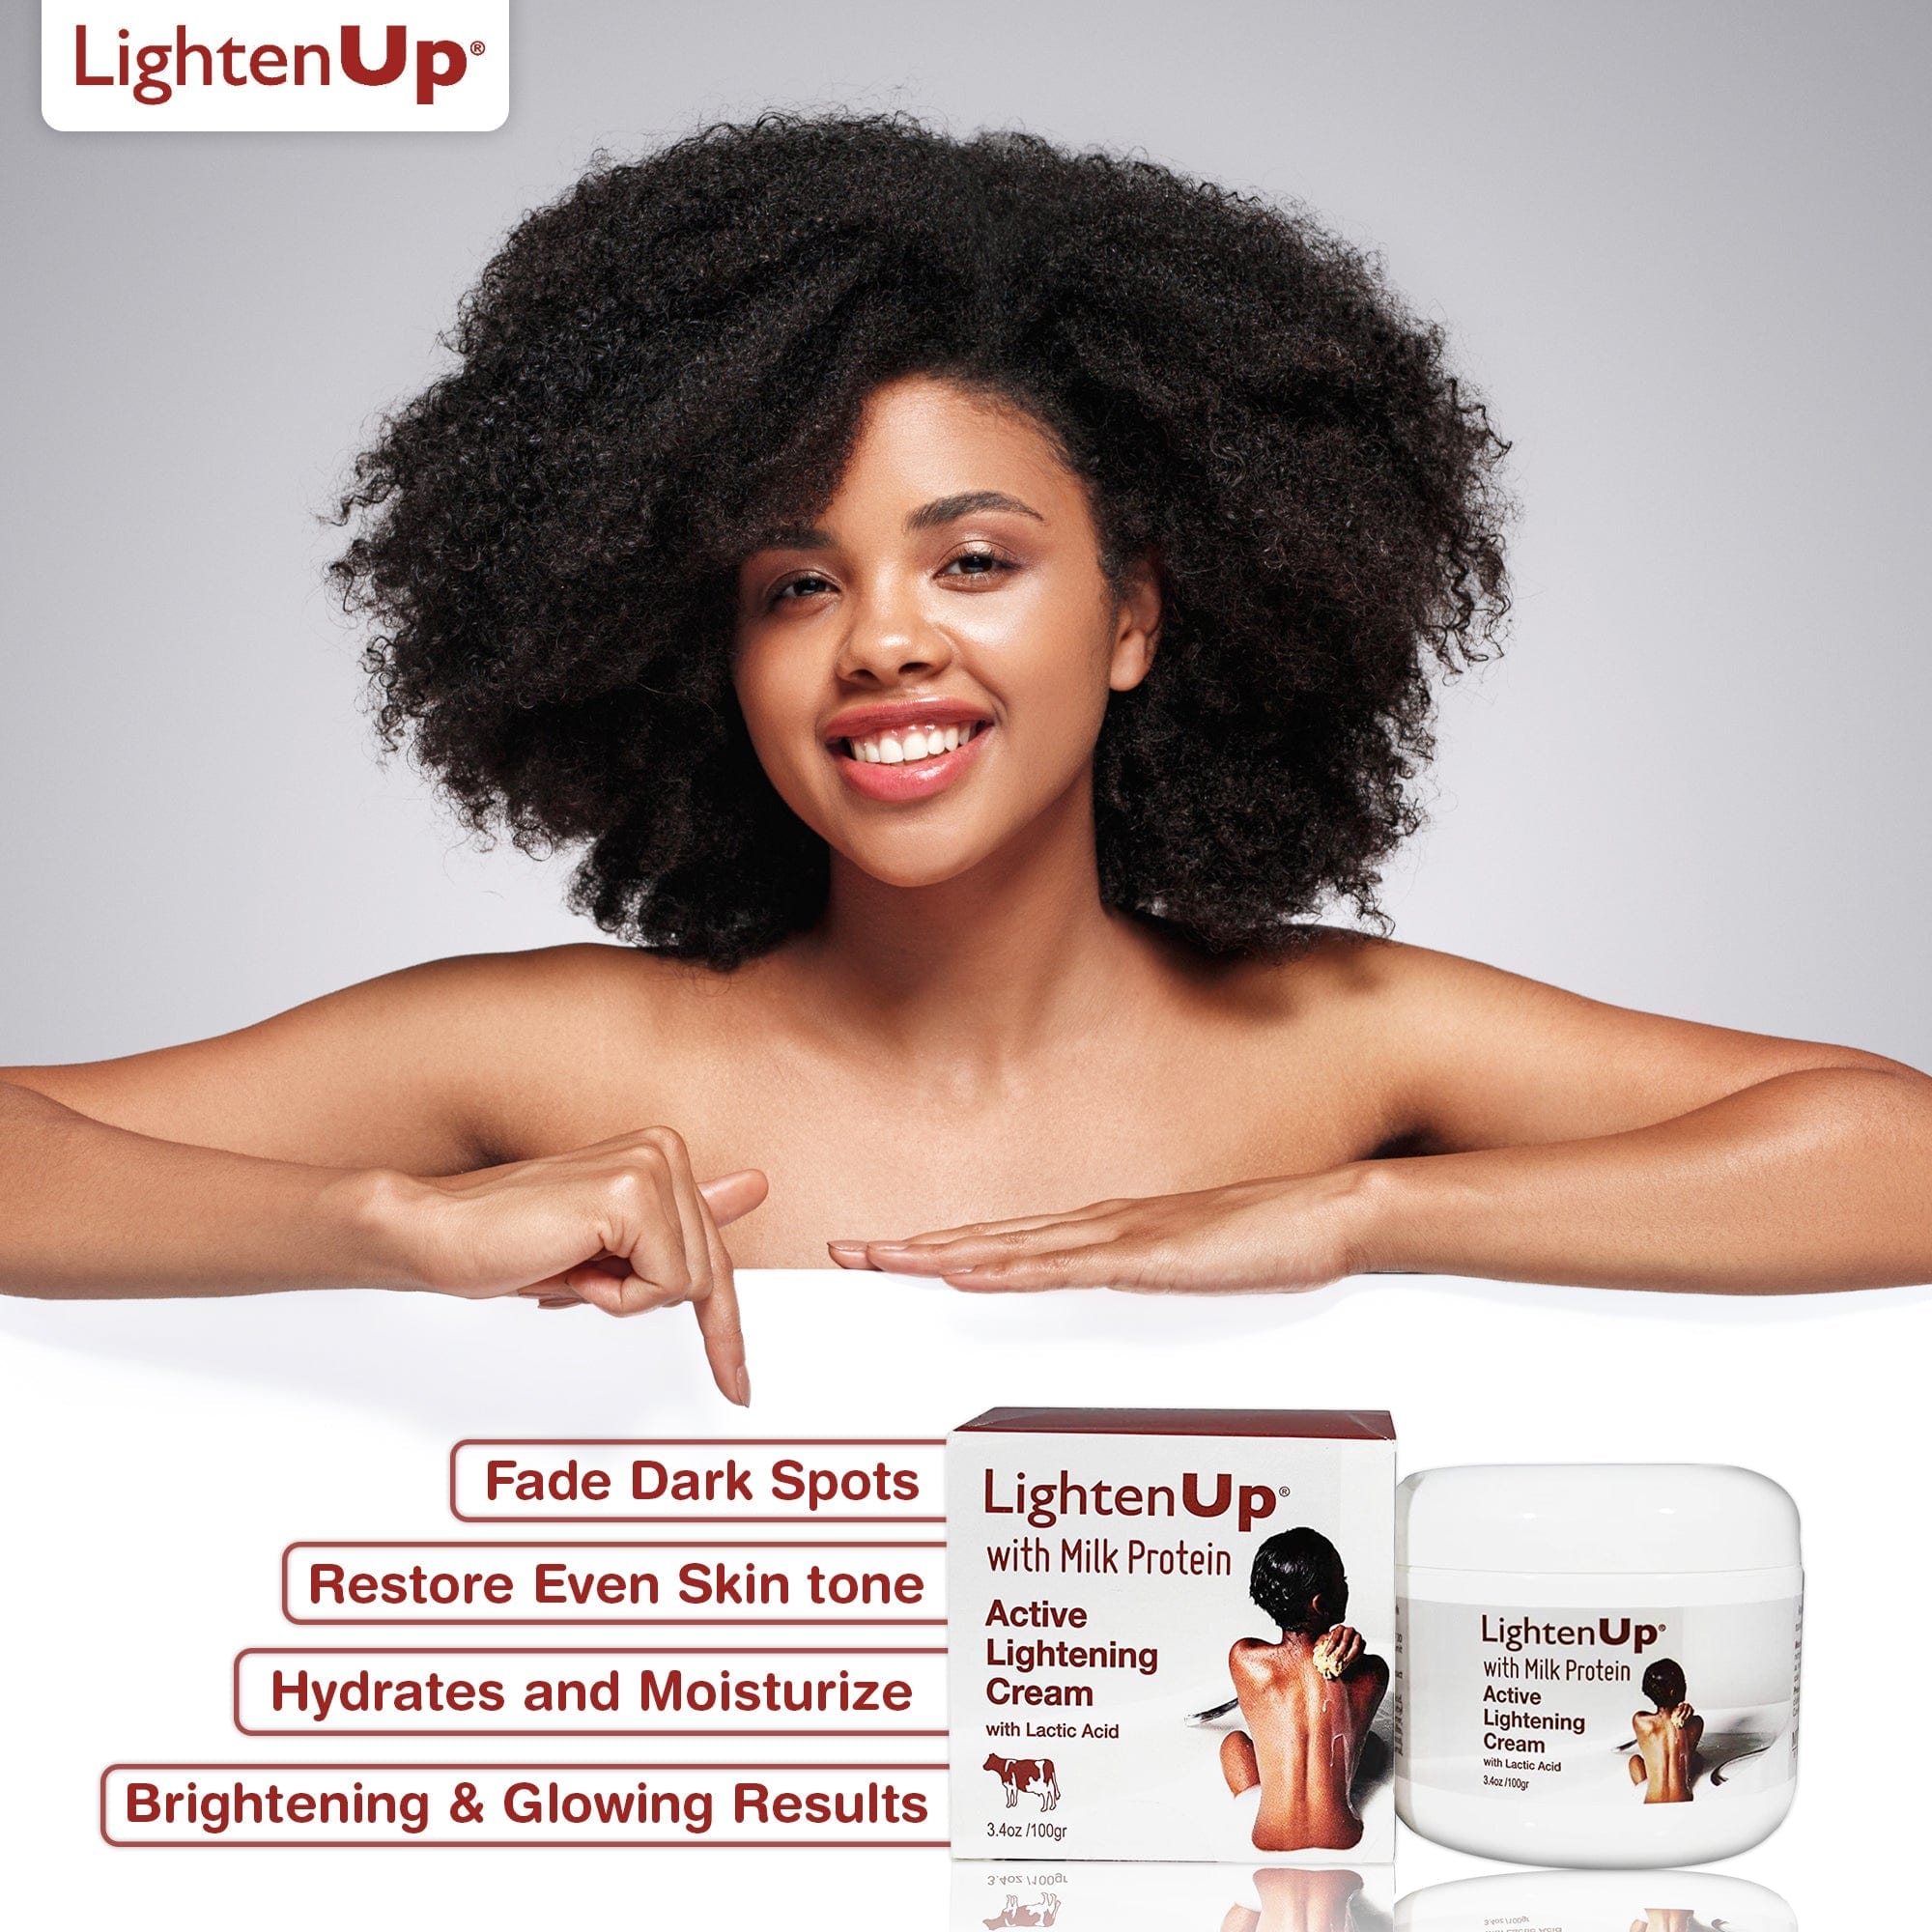 Omic Lightenup Lactic Acid Active Lightening Cream - 1004 / 3.5 Oz Mitchell Brands - Mitchell Brands - Skin Lightening, Skin Brightening, Fade Dark Spots, Shea Butter, Hair Growth Products